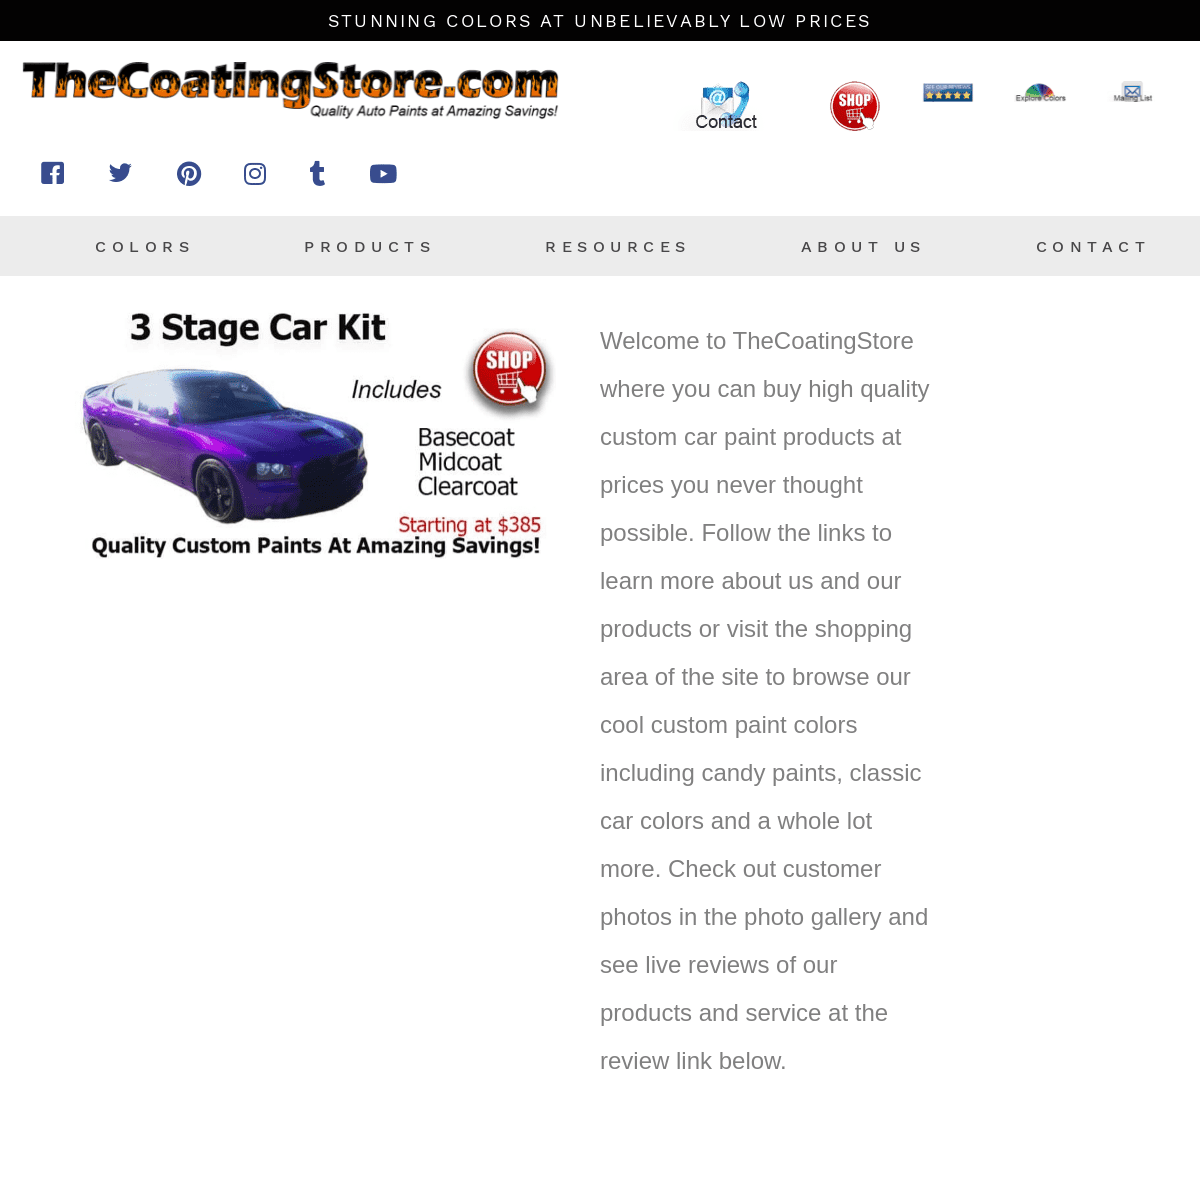 A complete backup of https://thecoatingstore.com